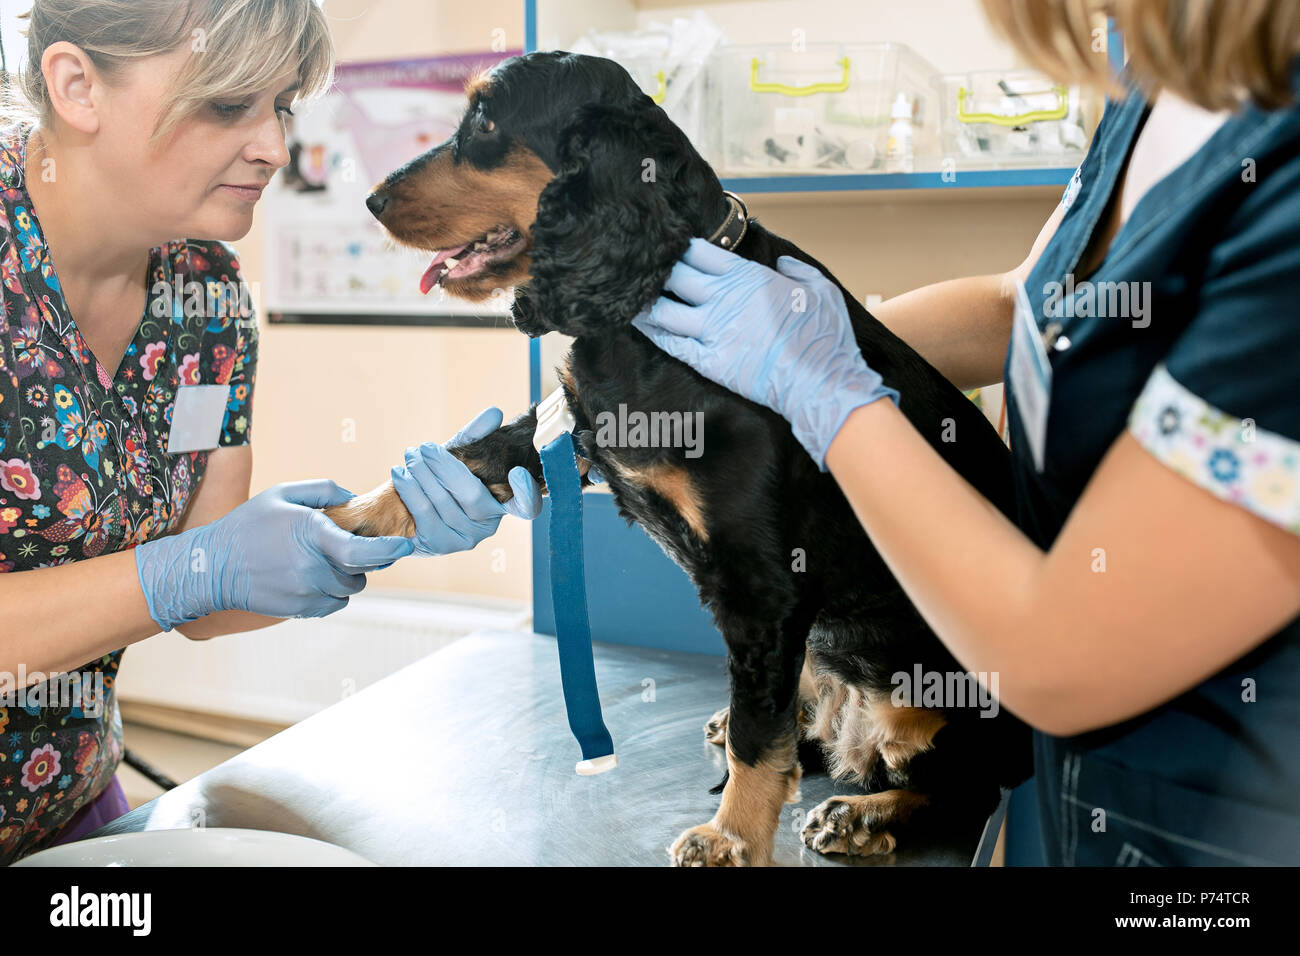 The Medicine Pet Care And People Concept Dog And Veterinarian Doctor At Vet Clinic Stock Photo Alamy